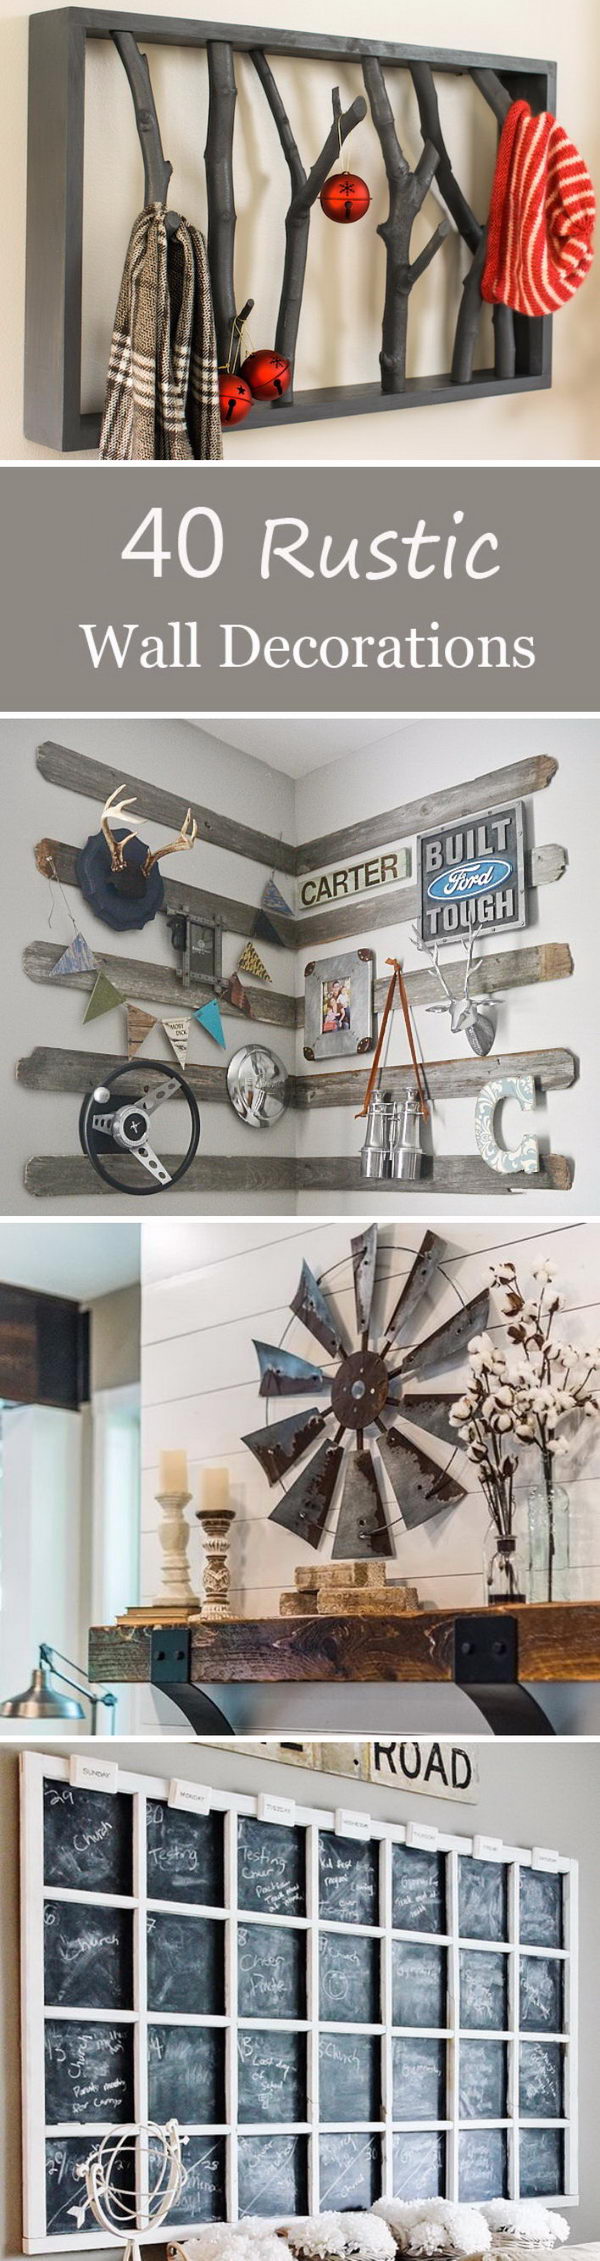 Rustic wall decorations for more warmth in your home. 